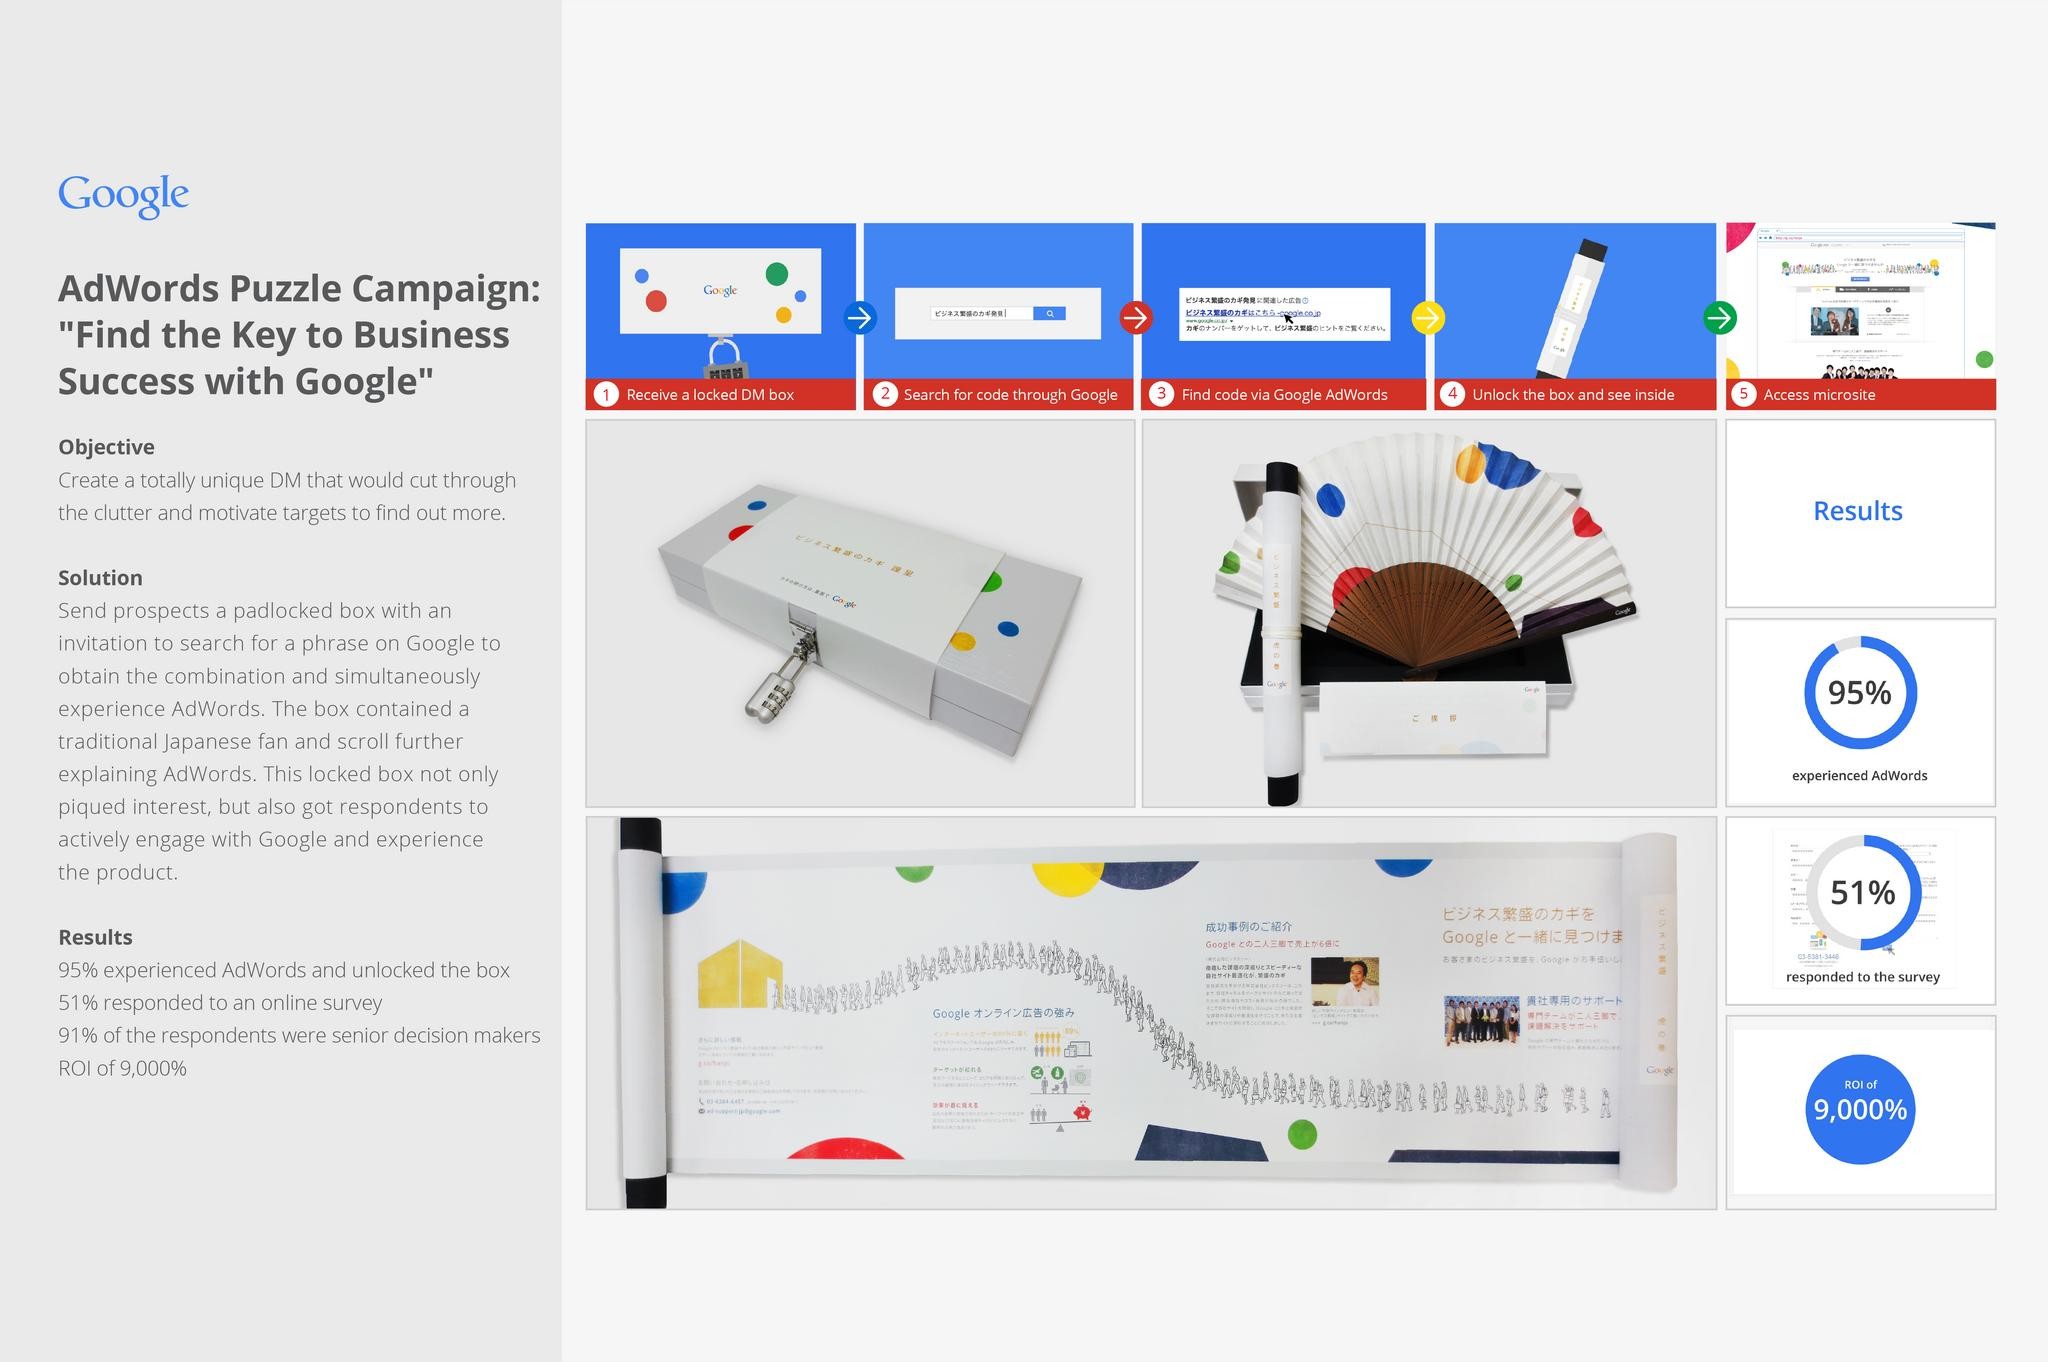 ADWORDS PUZZLE CAMPAIGN: FIND THE KEY TO BUSINESS SUCCESS WITH GOOGLE